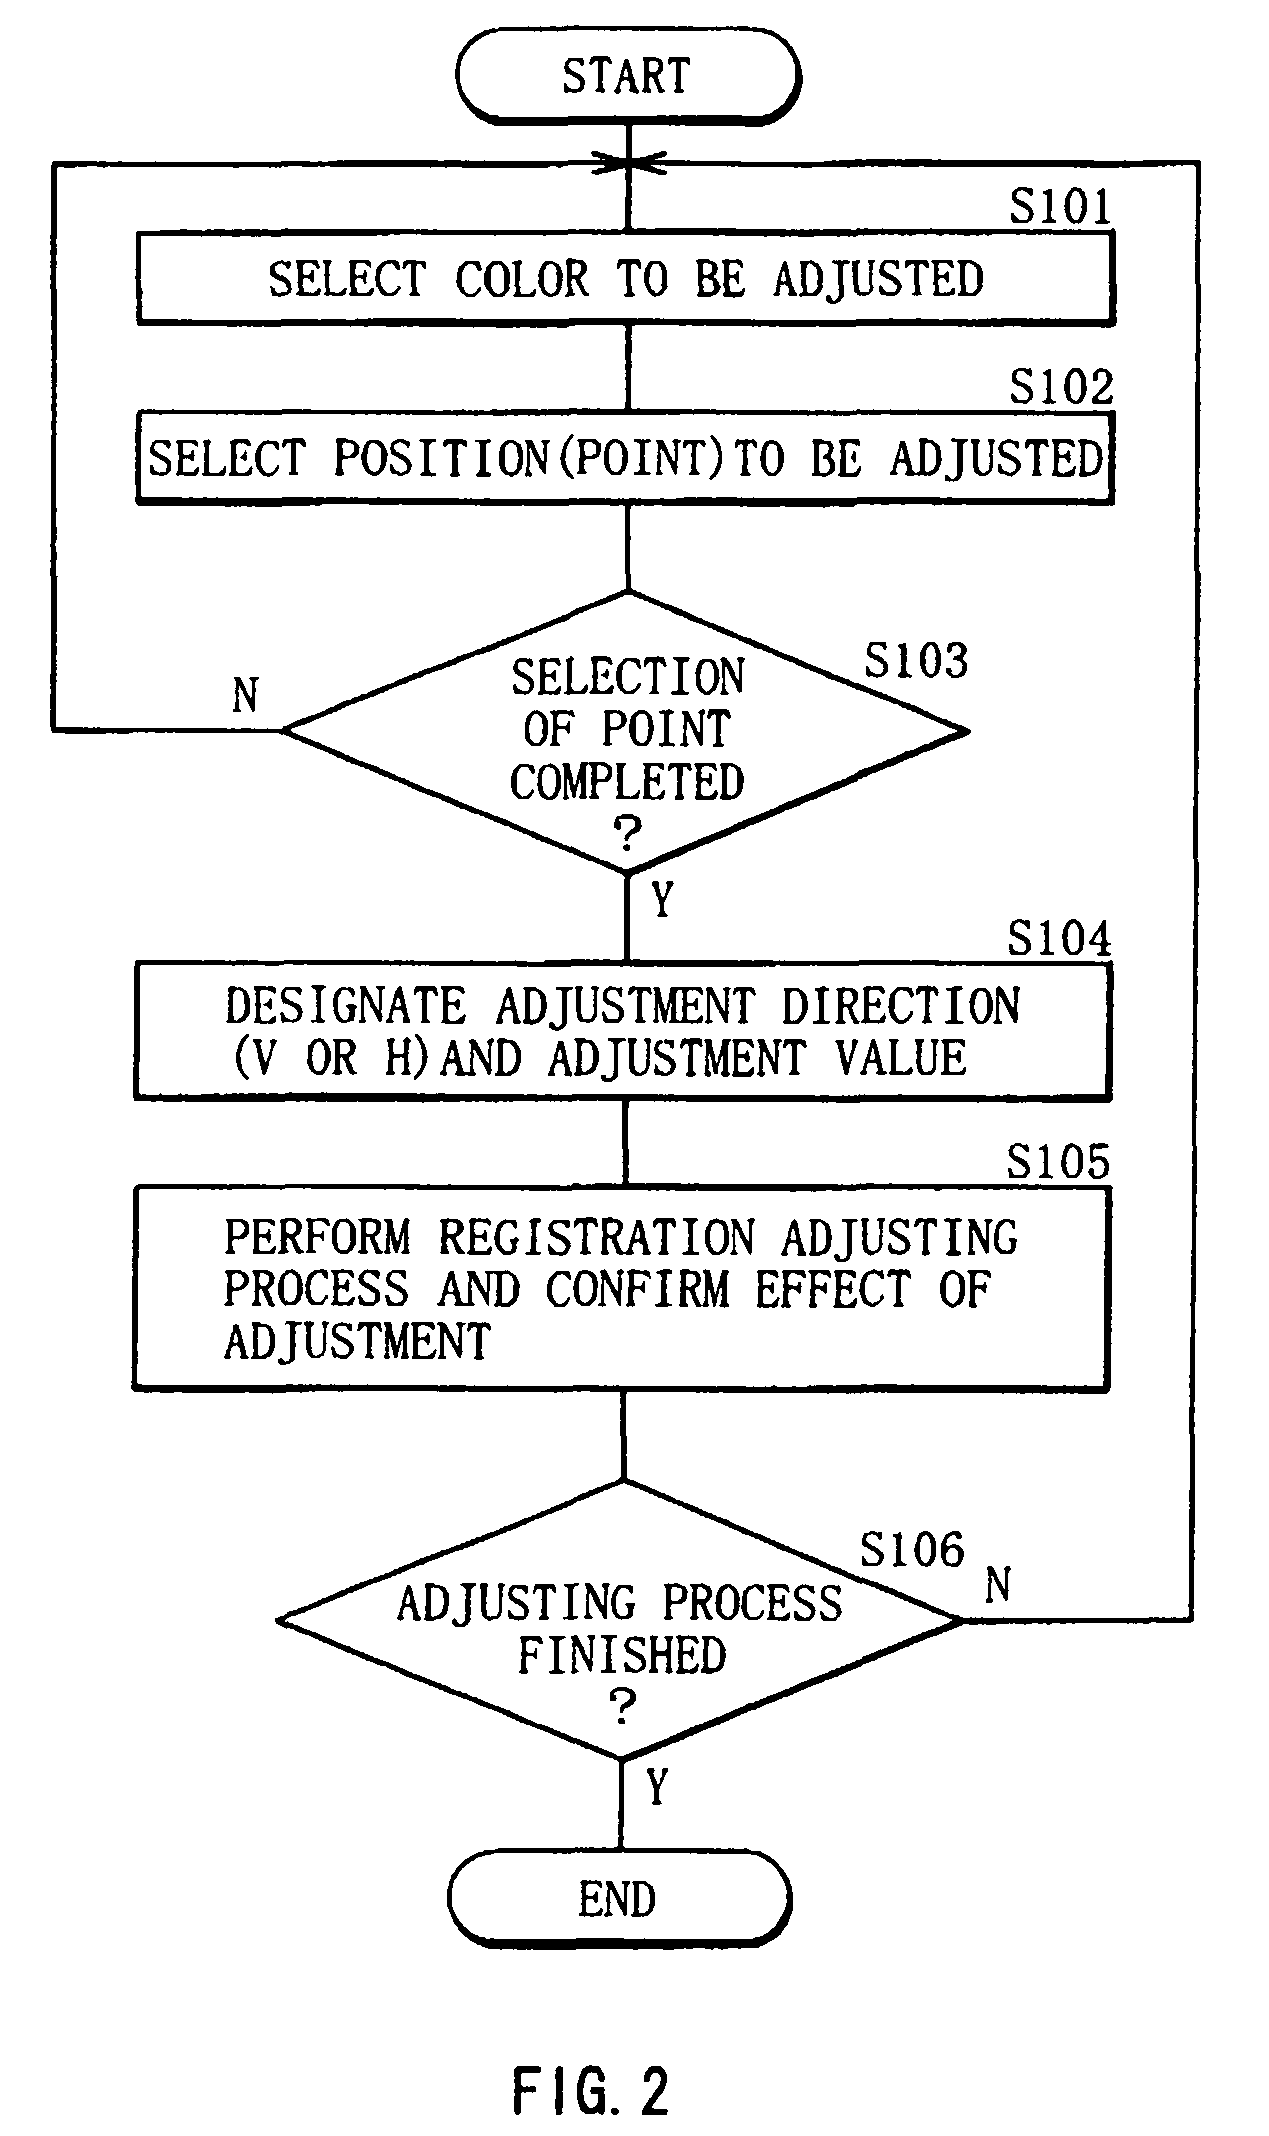 Projection display apparatus for facilitating registration adjustment of colors of a display image